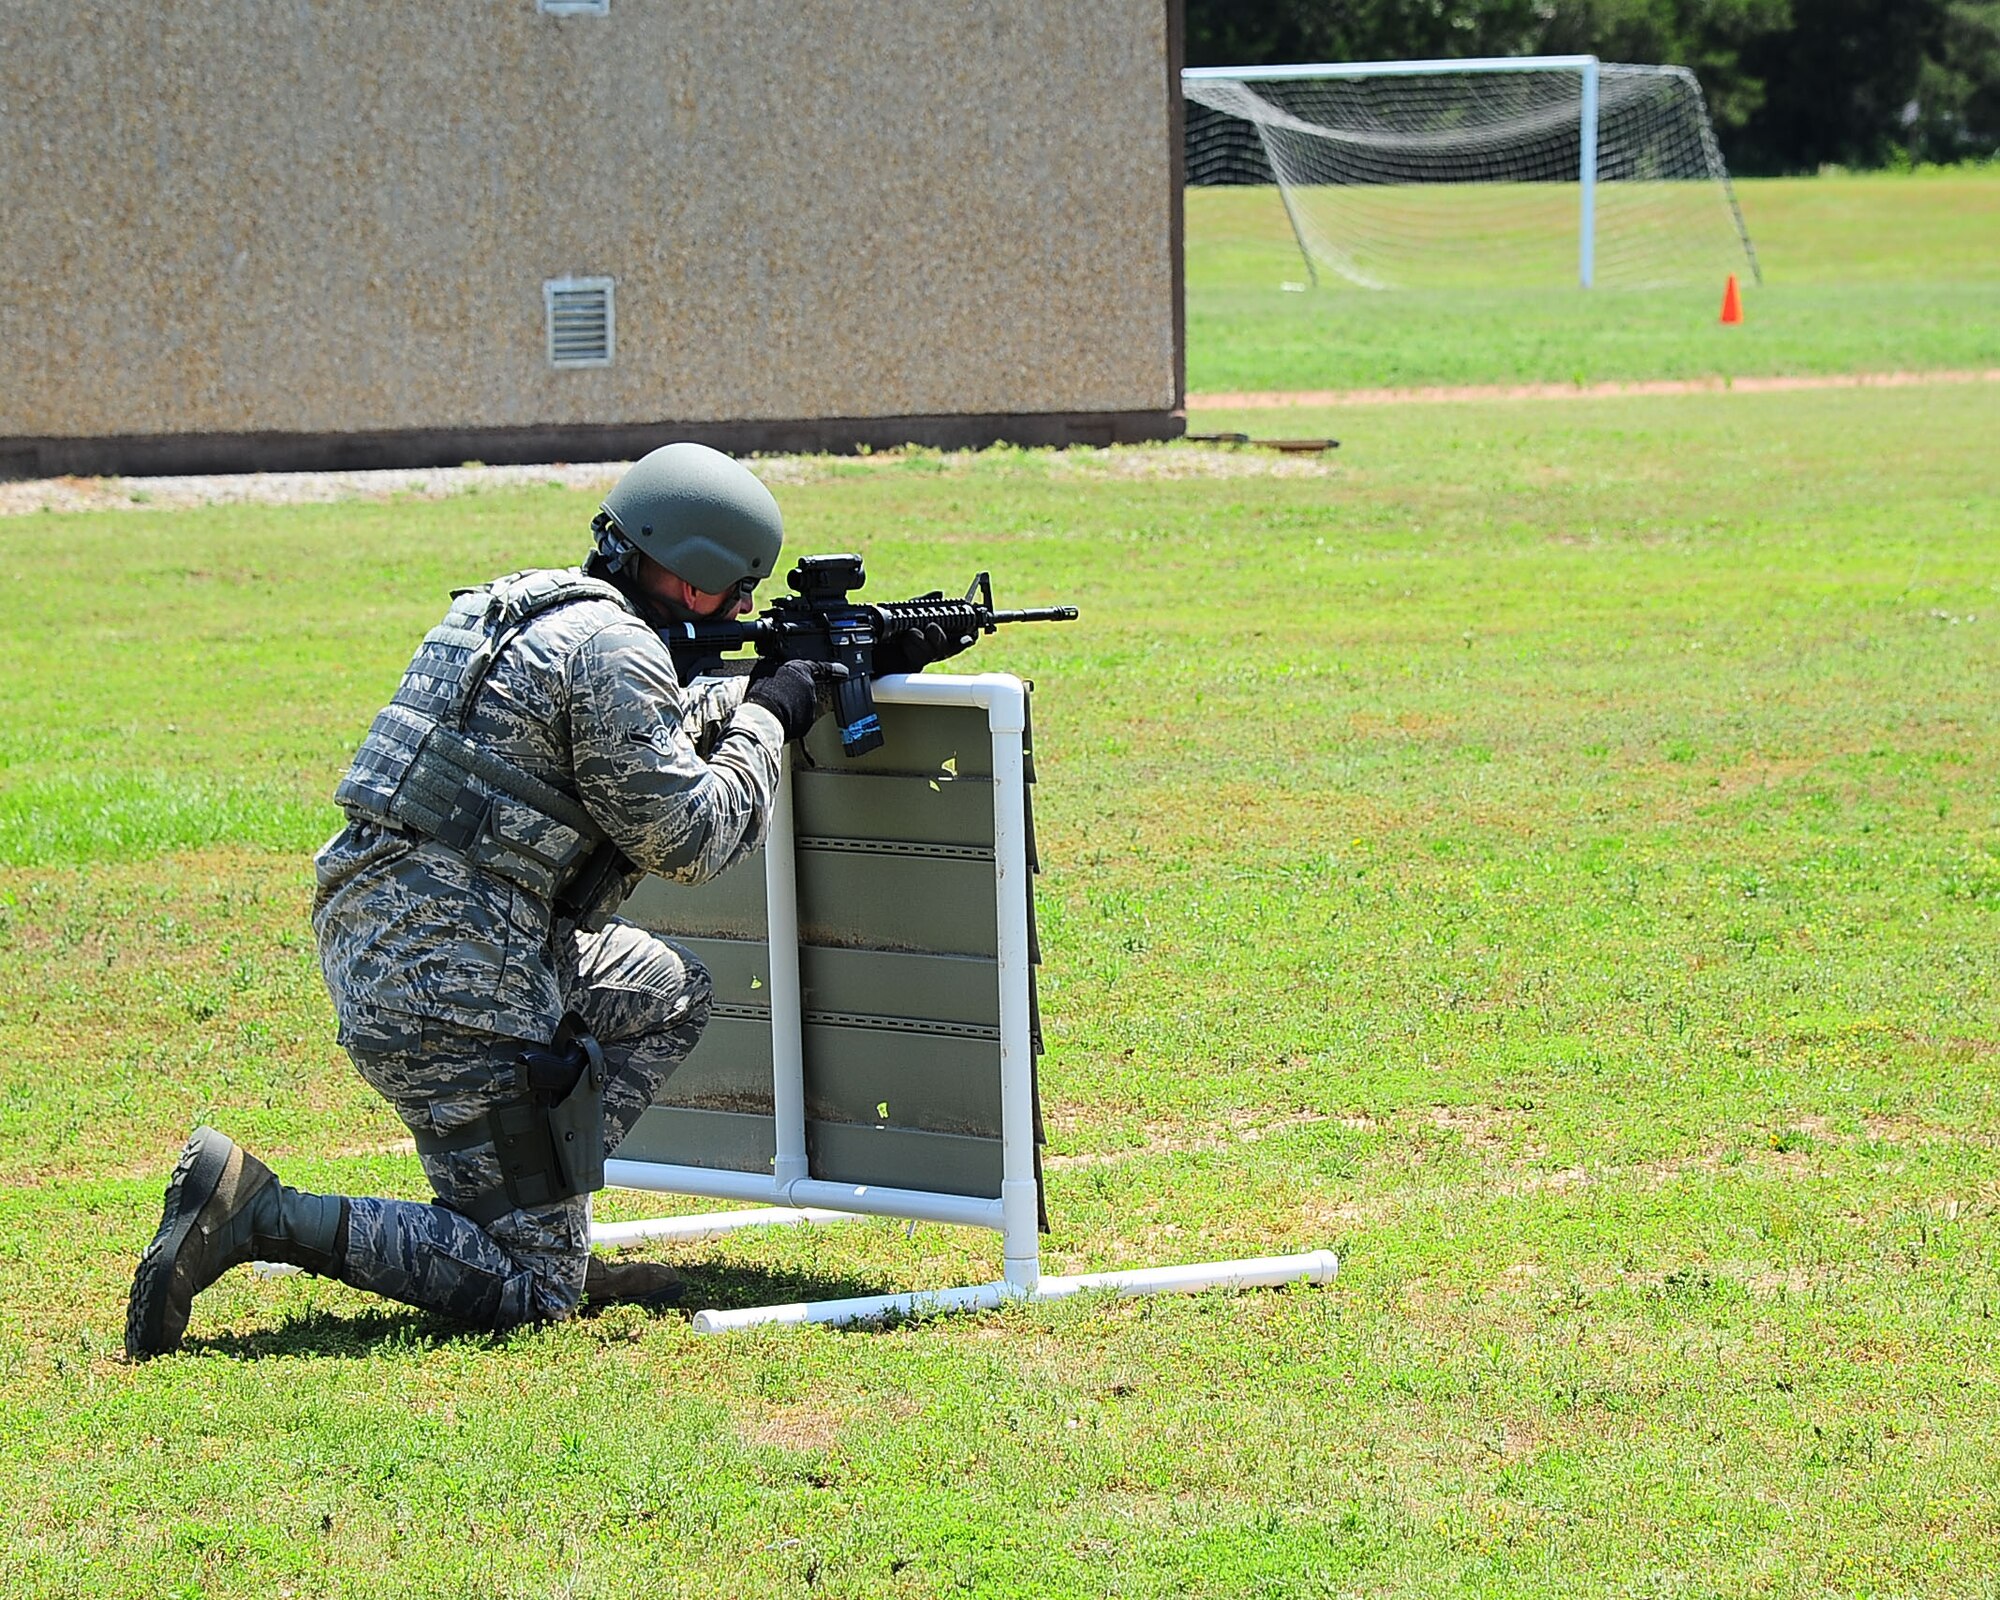 Airman Lucas McWhorter, 14th Security Forces Squadron Installation Entry Controller, participates in the Shoot, Move, Communicate drill May 16, 2017, at Columbus Air Force Base, Mississippi. Defenders use simulation rounds instead of live ammunition during the drill in order to make the training course more safe. (U.S. Air Force photo by Airman 1st Class Beaux Hebert)